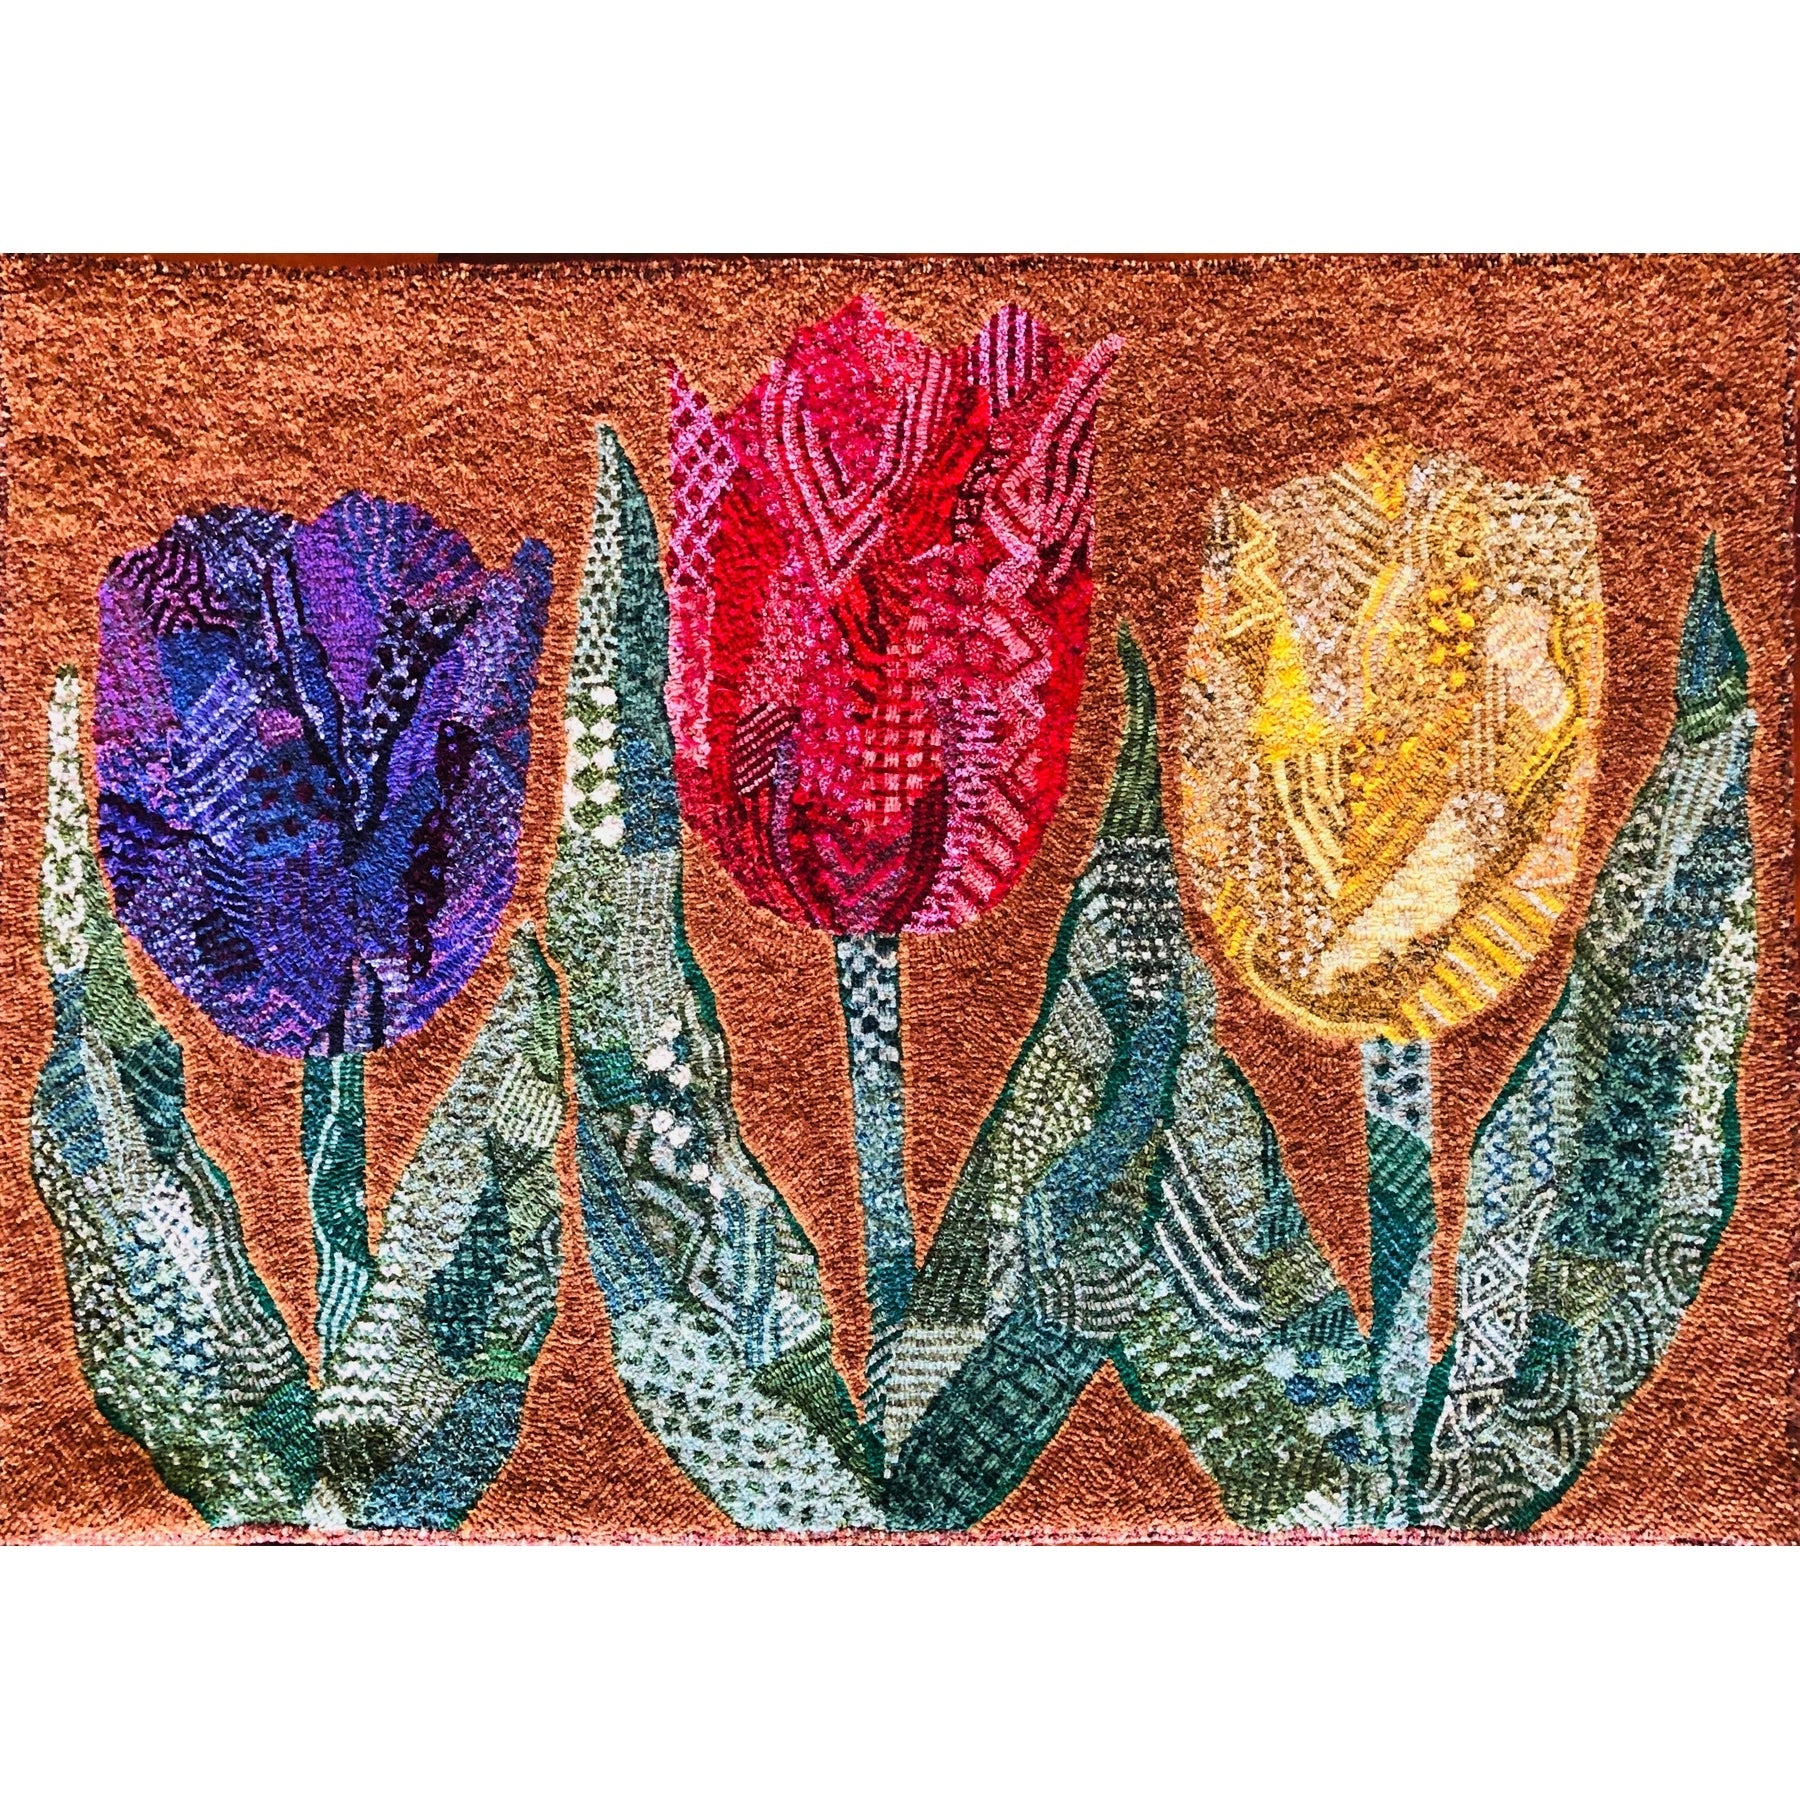 The Splendor of Spring, rug hooked by Janice Riley